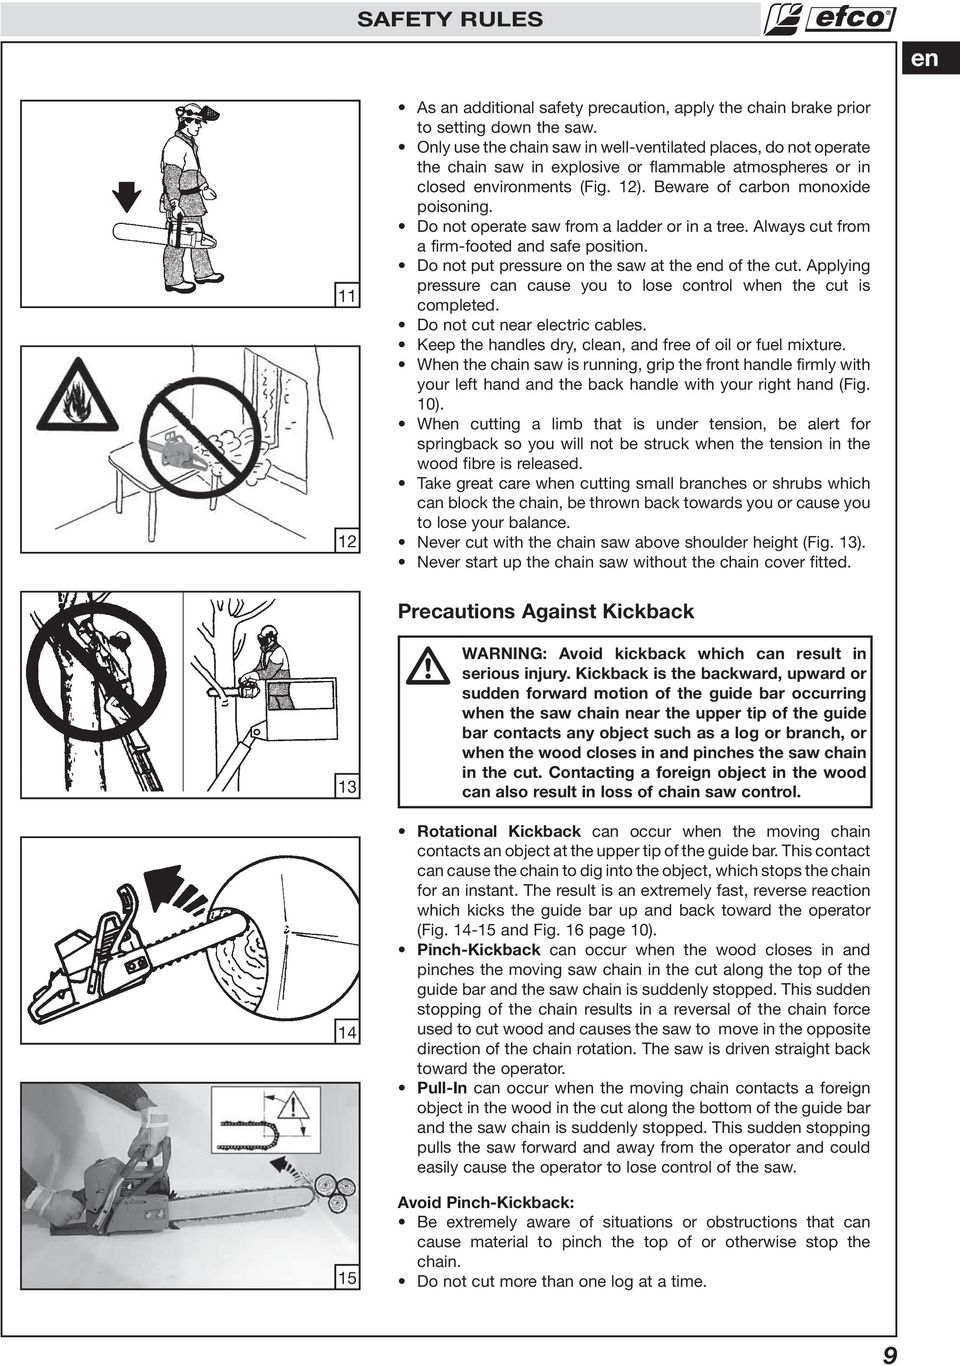 Do not operate saw from a ladder or in a tree. Always cut from a firm-footed and safe position. Do not put pressure on the saw at the end of the cut.